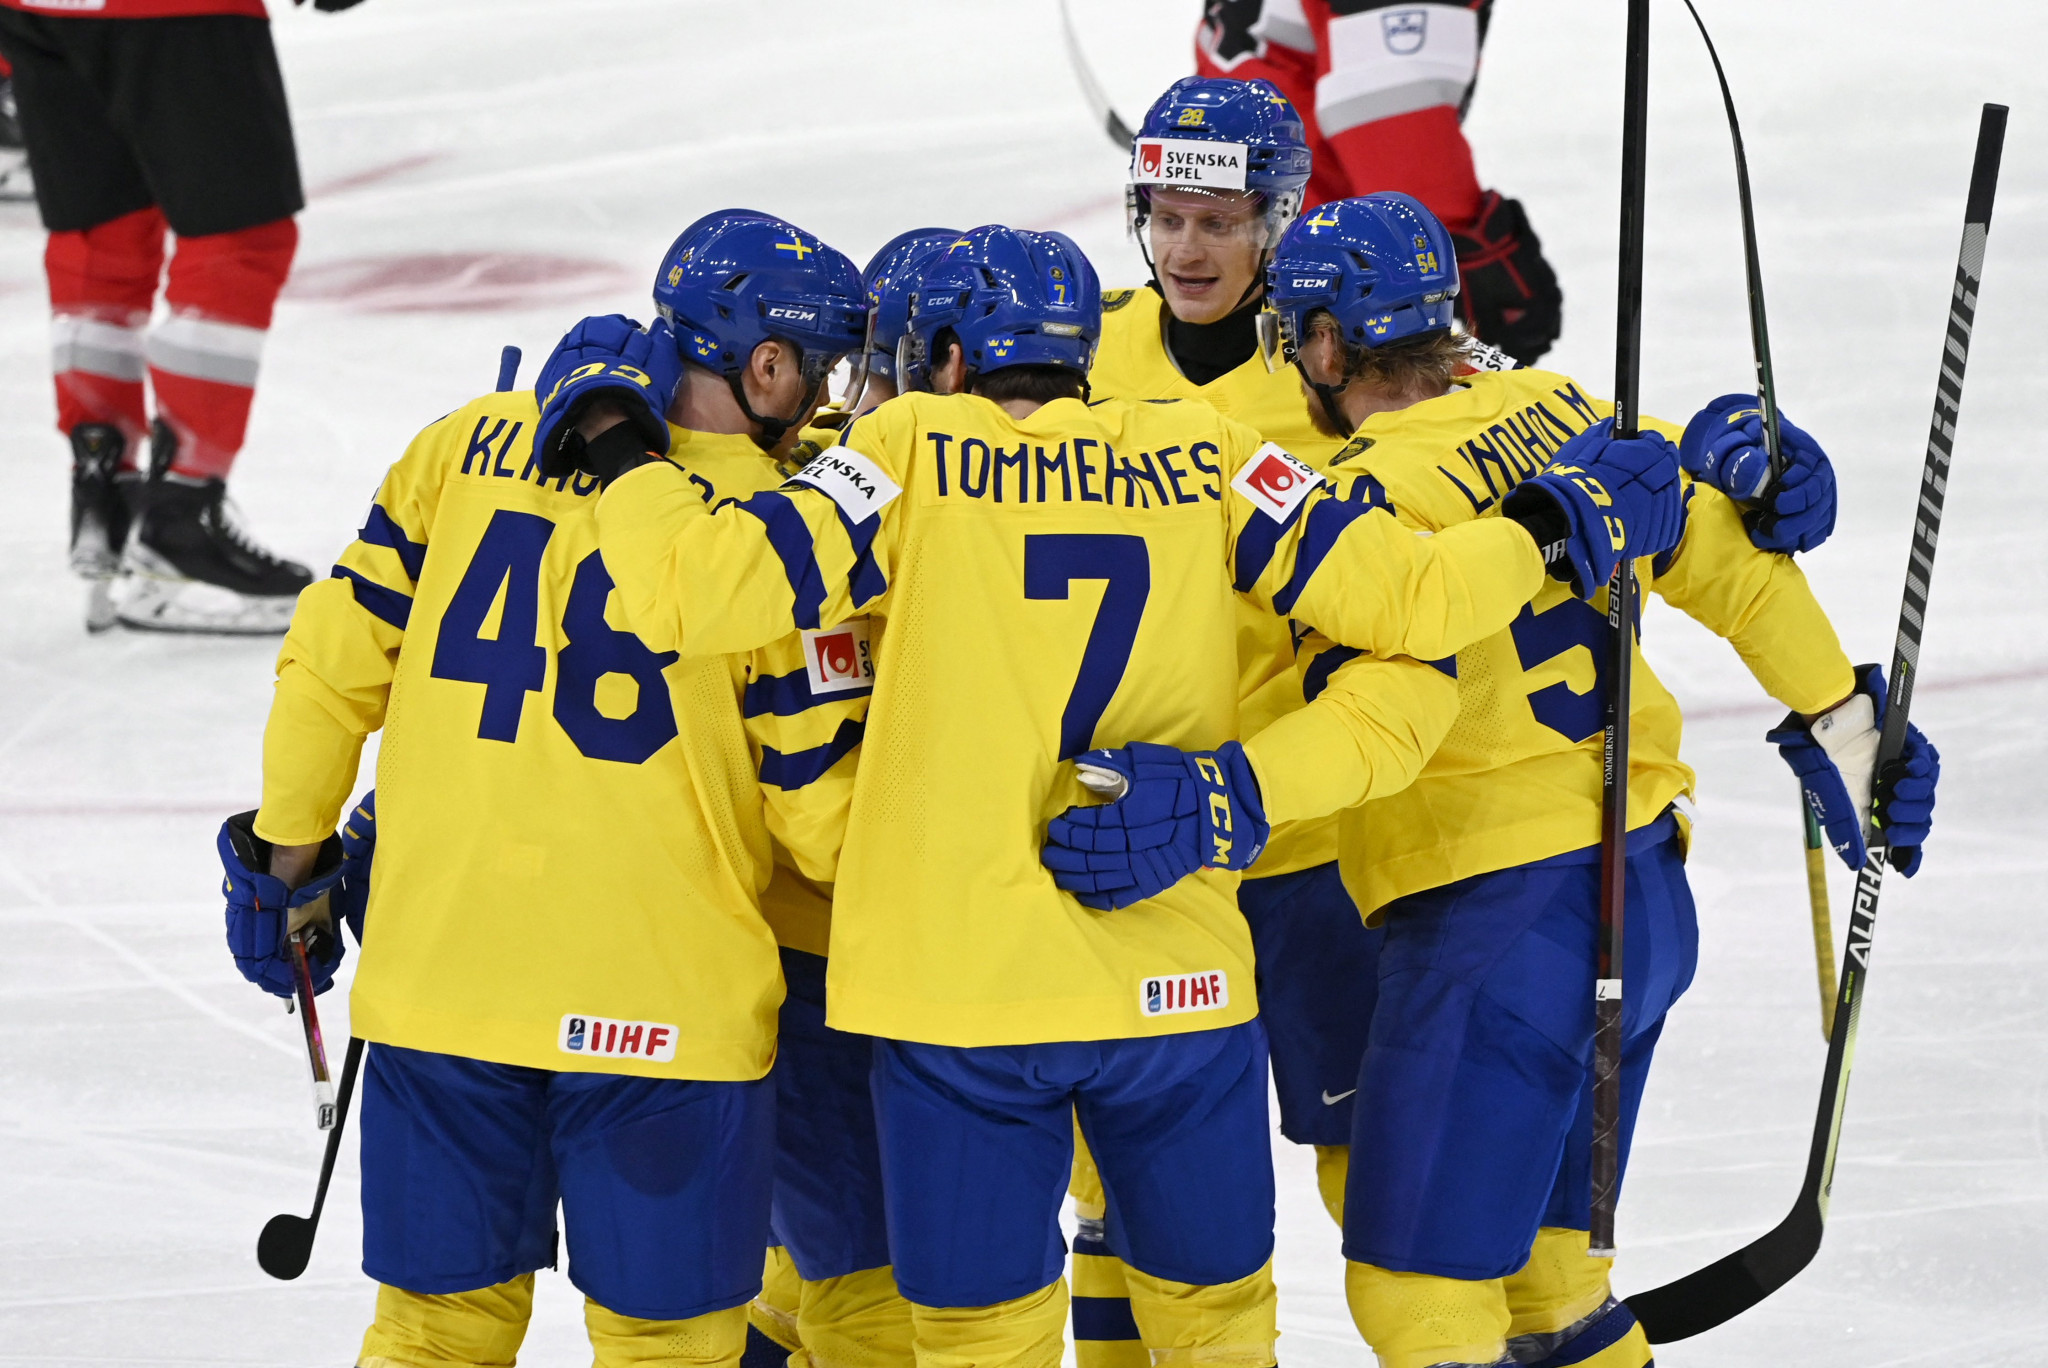 Sweden topple Finland in top of table clash at IIHF World Championship